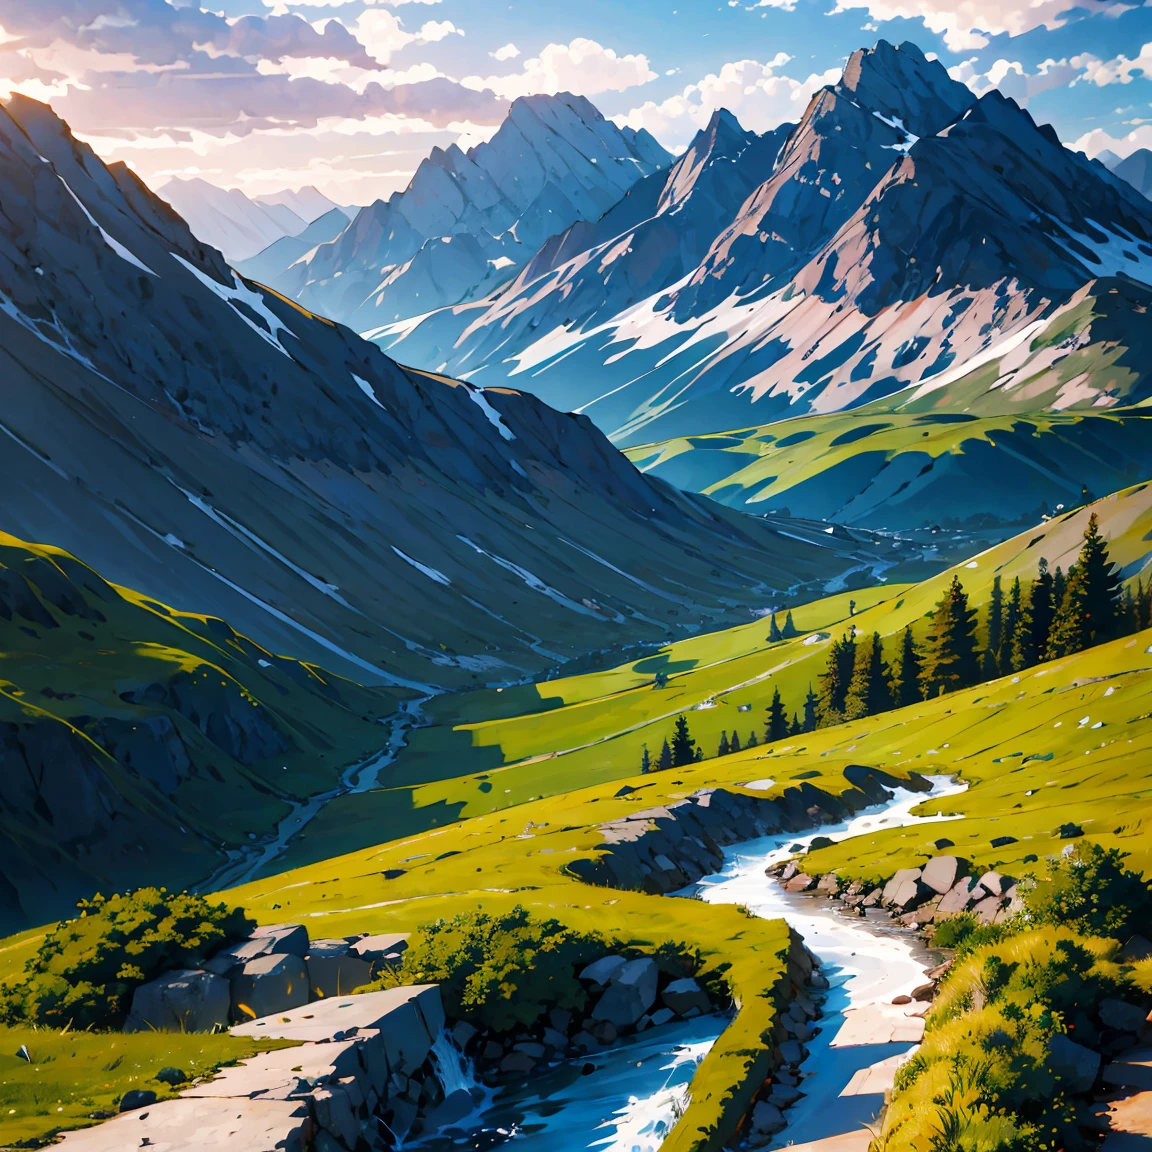 A beautiful landscape with mountains and hills